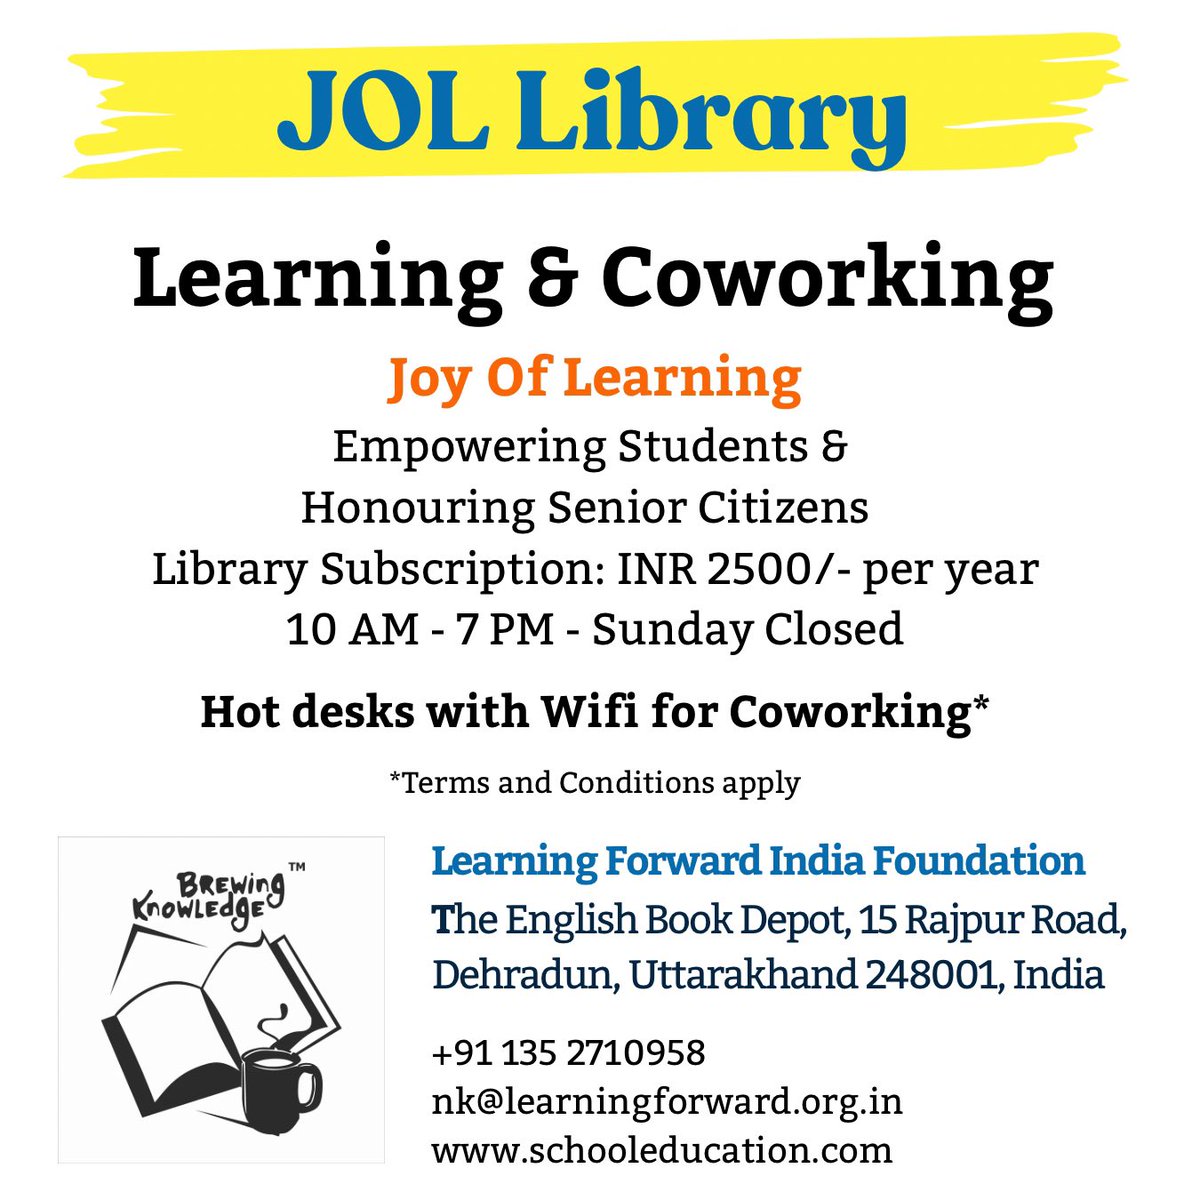 We are now open, celebrating 100 years of the iconic English Book Depot - the JOL Library dedicated to #joyoflearning Support the Learning Forward India Foundation #ReadToLead social learning space and reading room on the first floor at the heart of Dehradun city @LFINFoundation